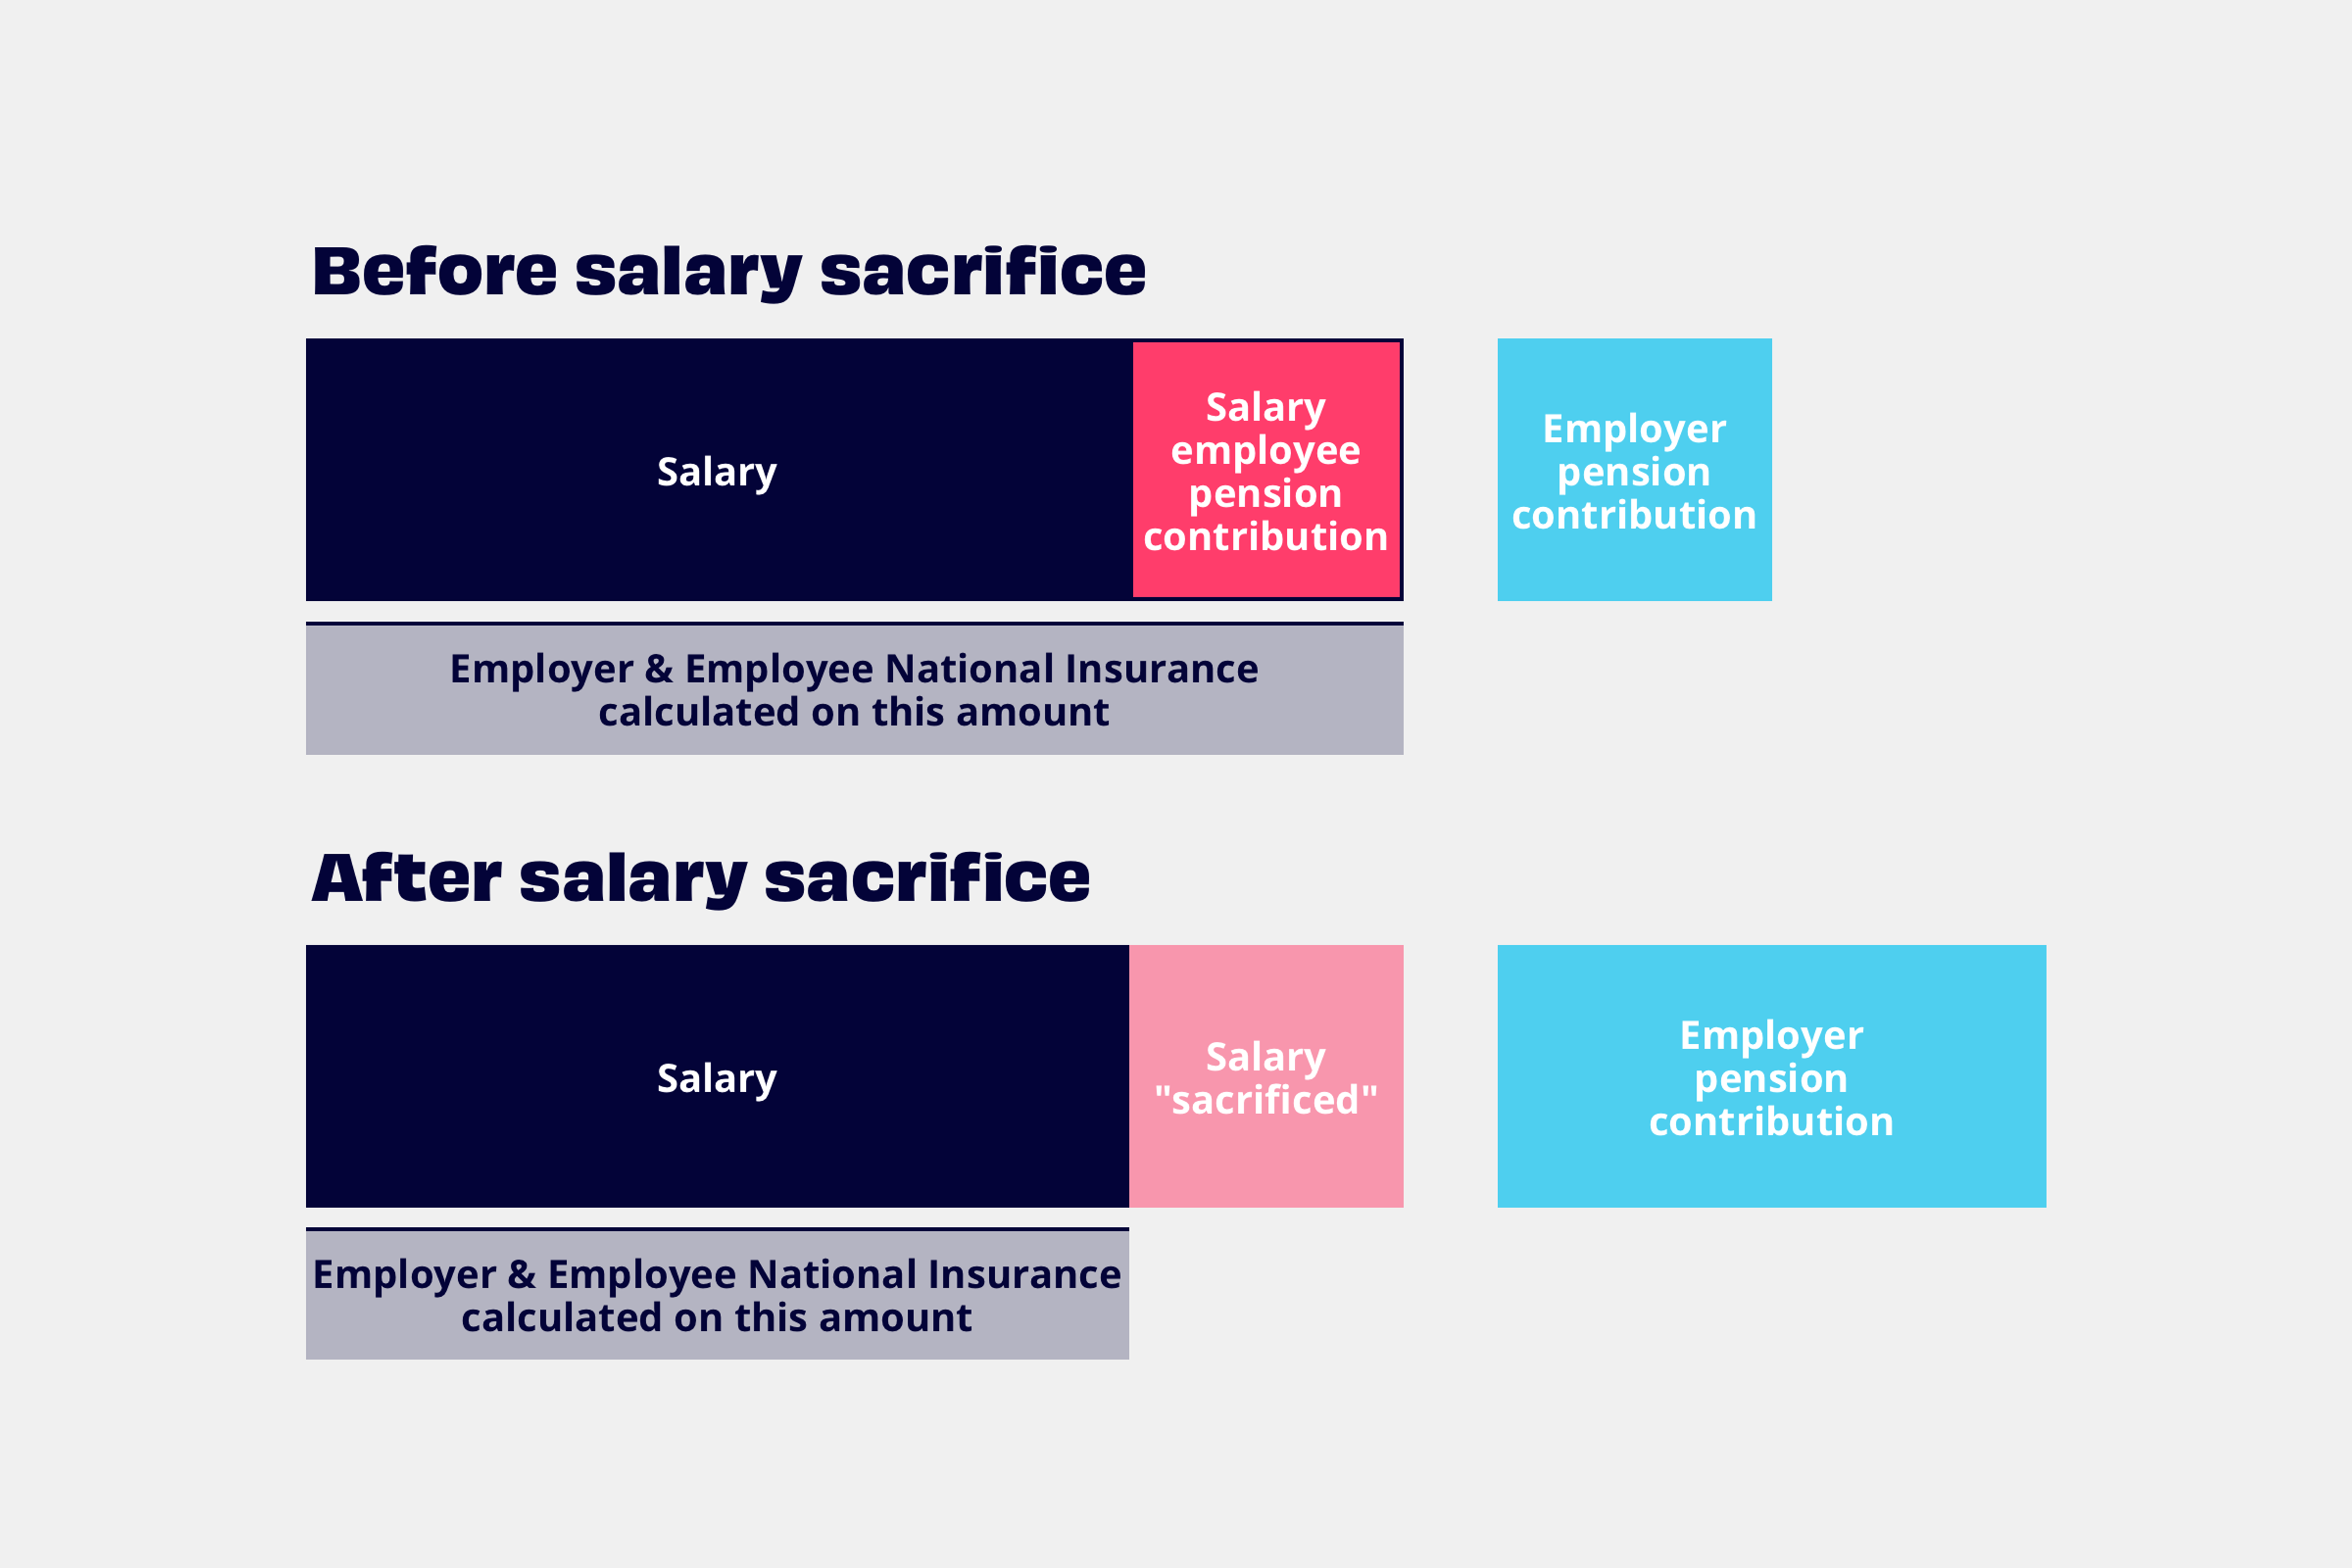 A bar chart showing before and after salary sacrifice pension contributions